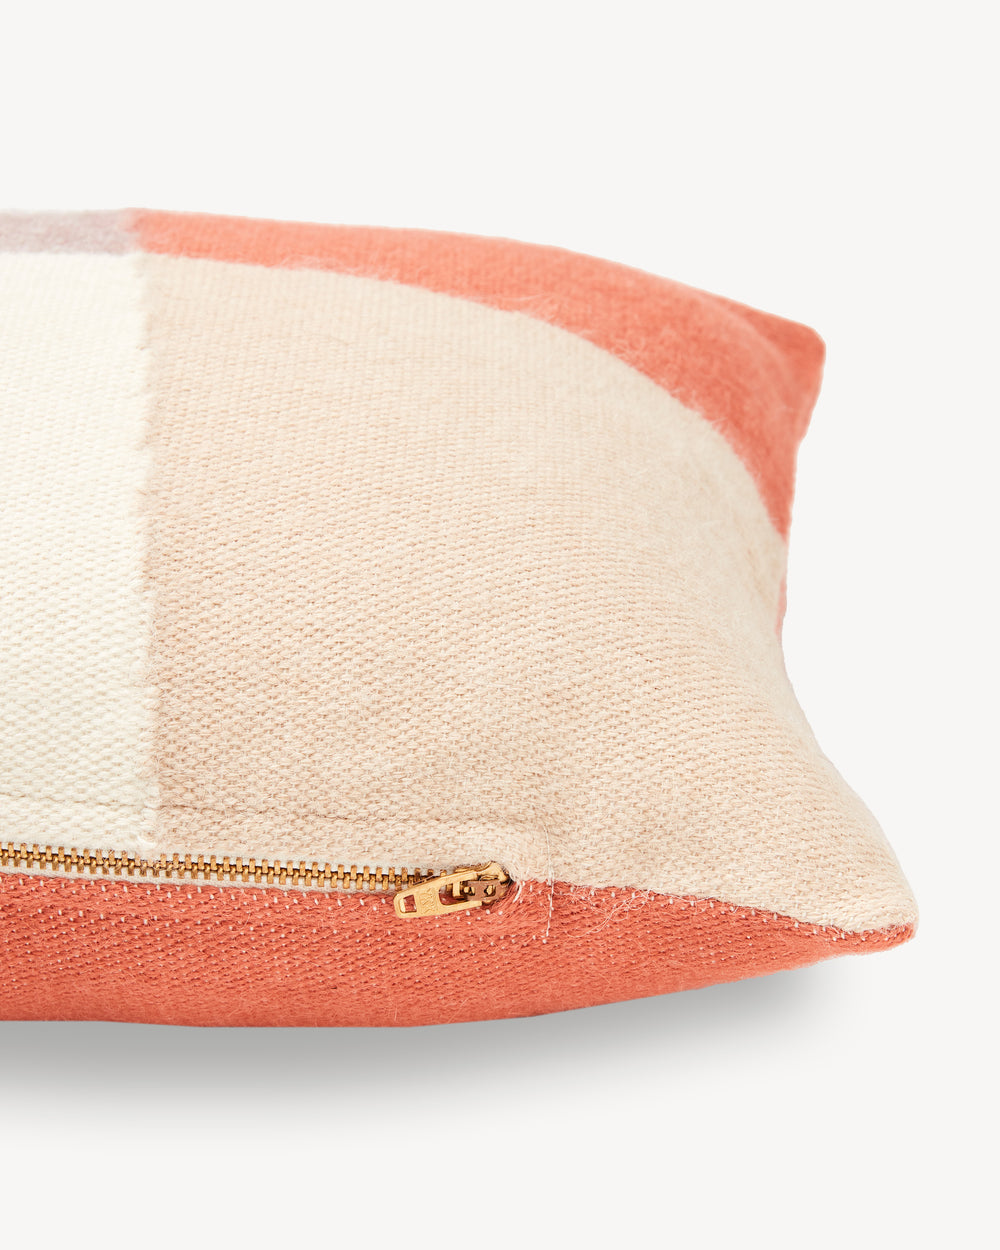 Patchwork Lumbar Pillow in Terracotta - Ethical Home Decor